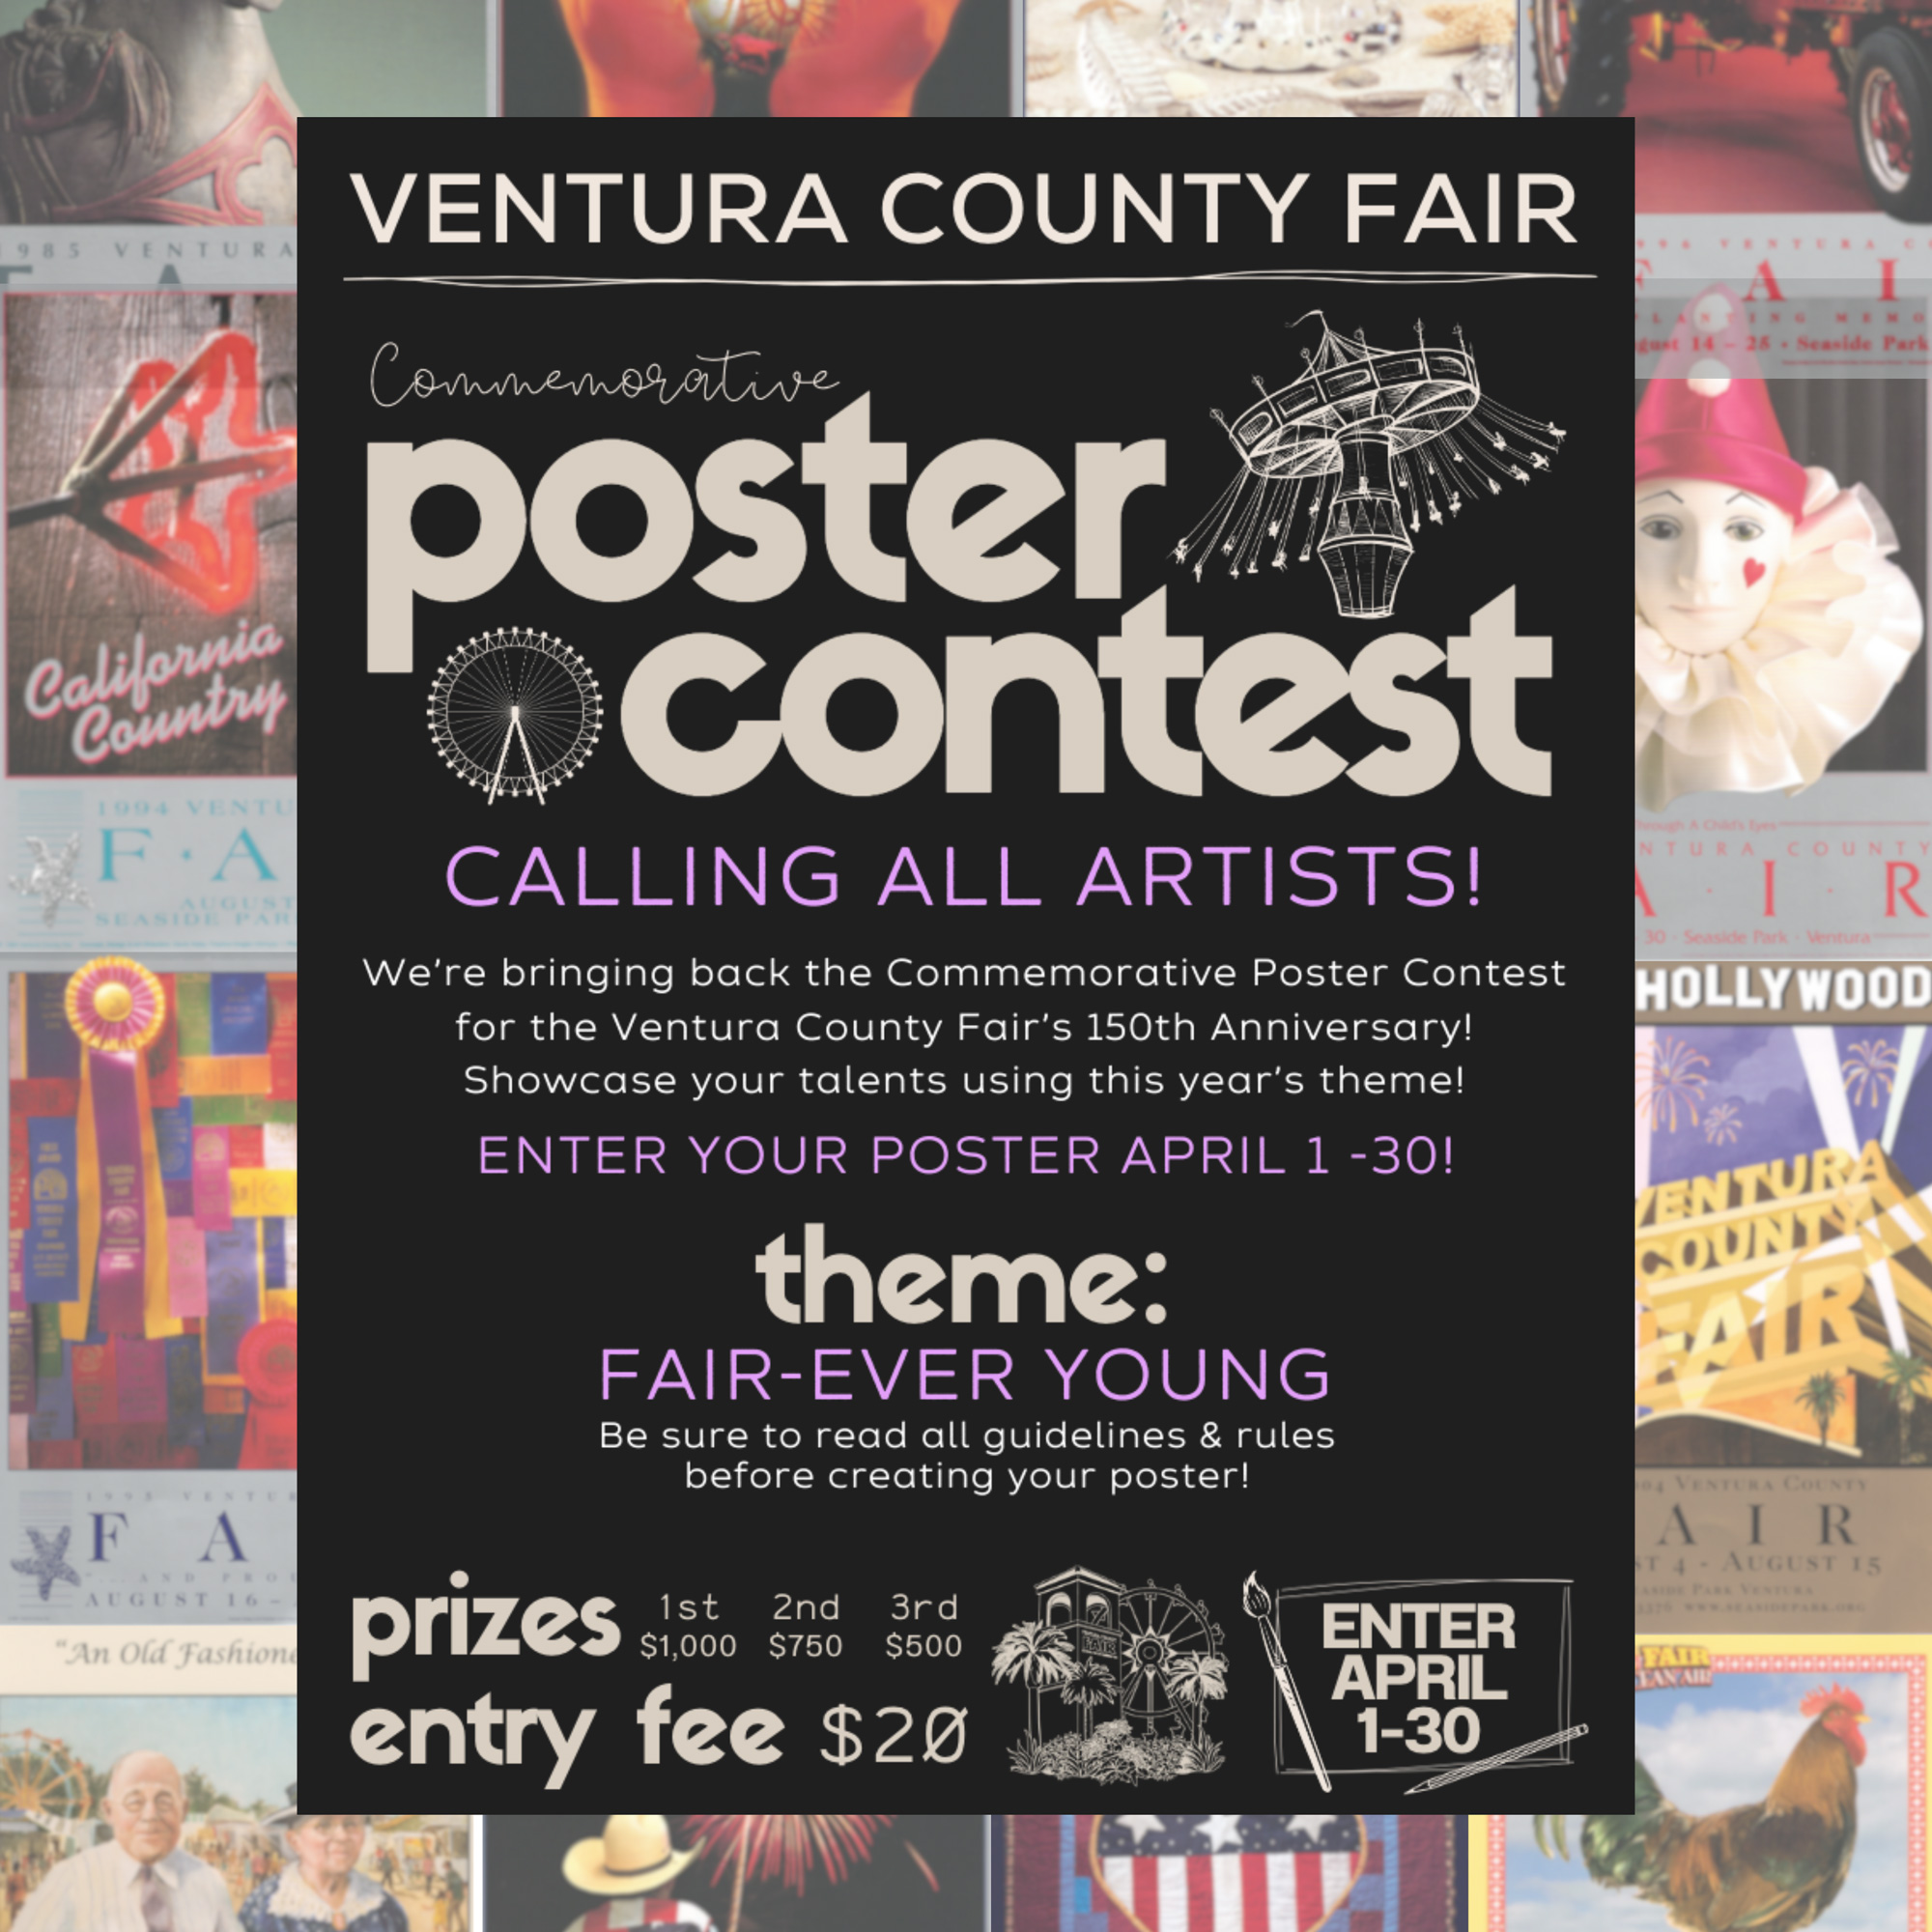 2024 Ventura County Fair Commemorative Post Contest call-to-action graphic, links to the details page: https://venturacountyfair.org/fair/applications/commemorative-poster-contest/